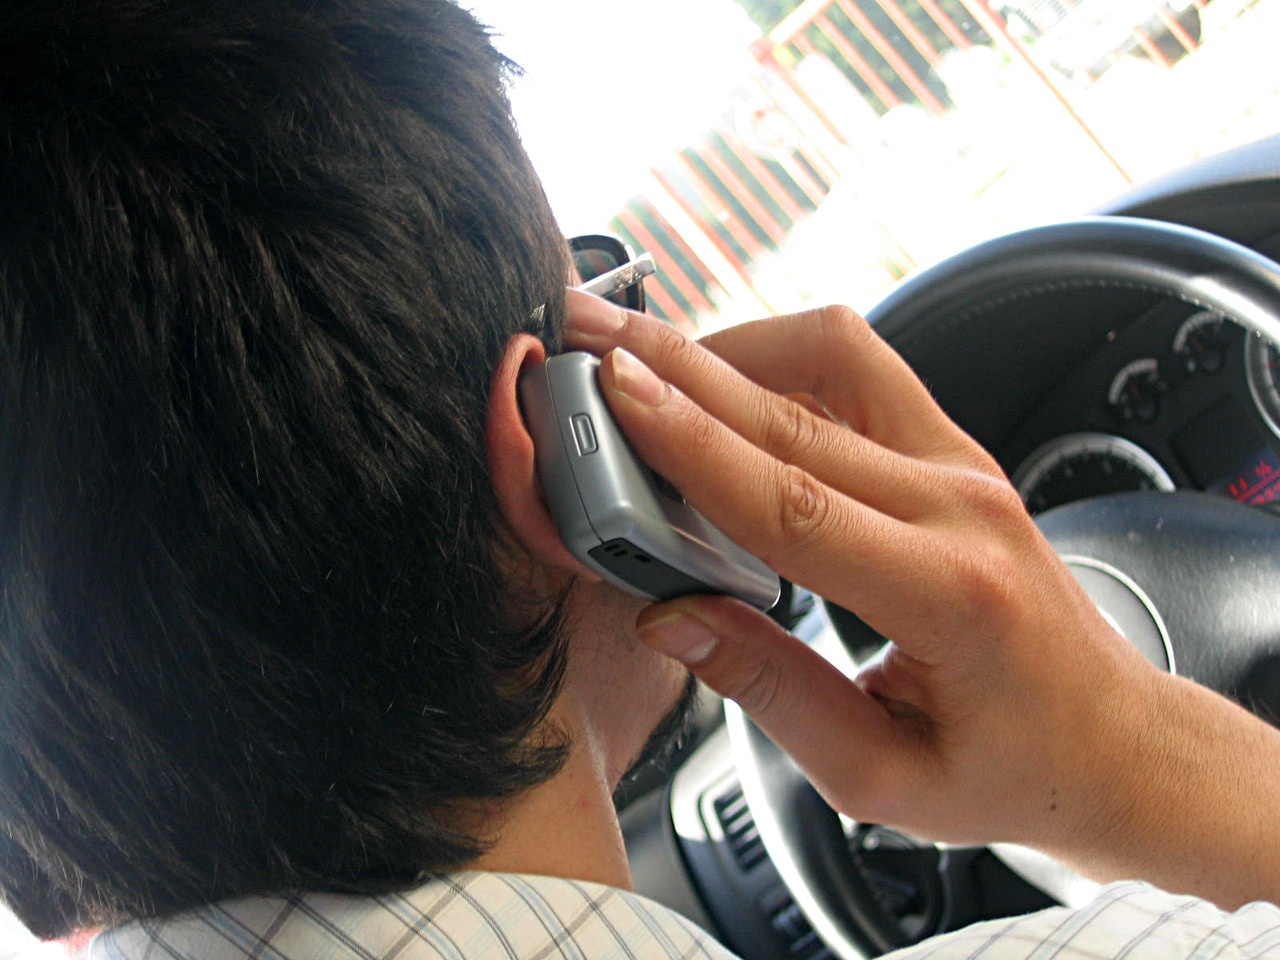 Driving distraction and inattention: safety tips for drivers